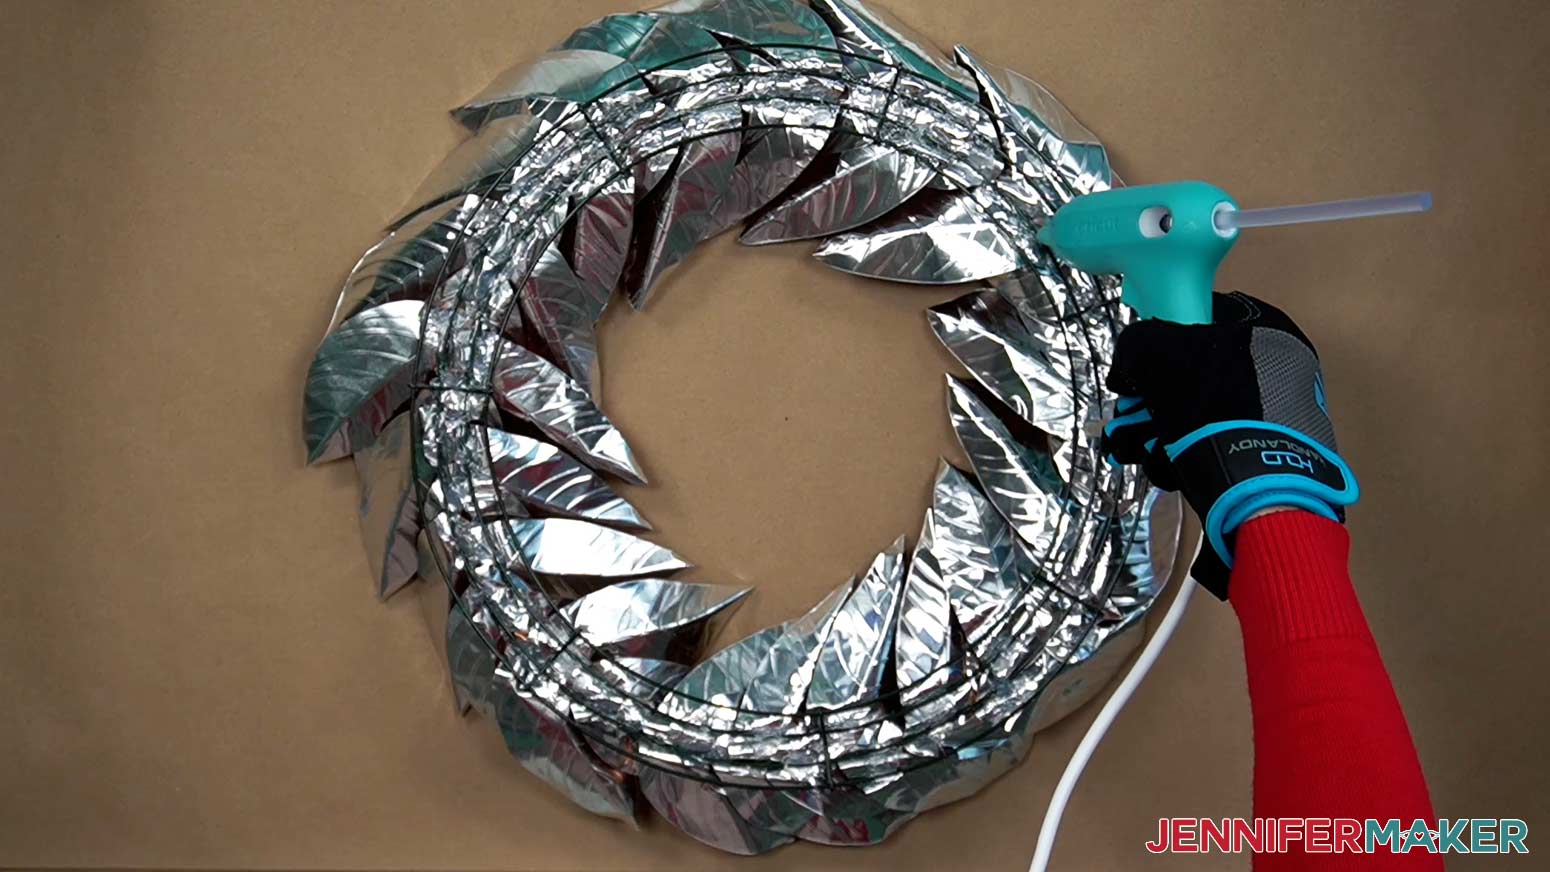 Apply hot glue to the entire backside of the wreath to secure the metal leaves in place.